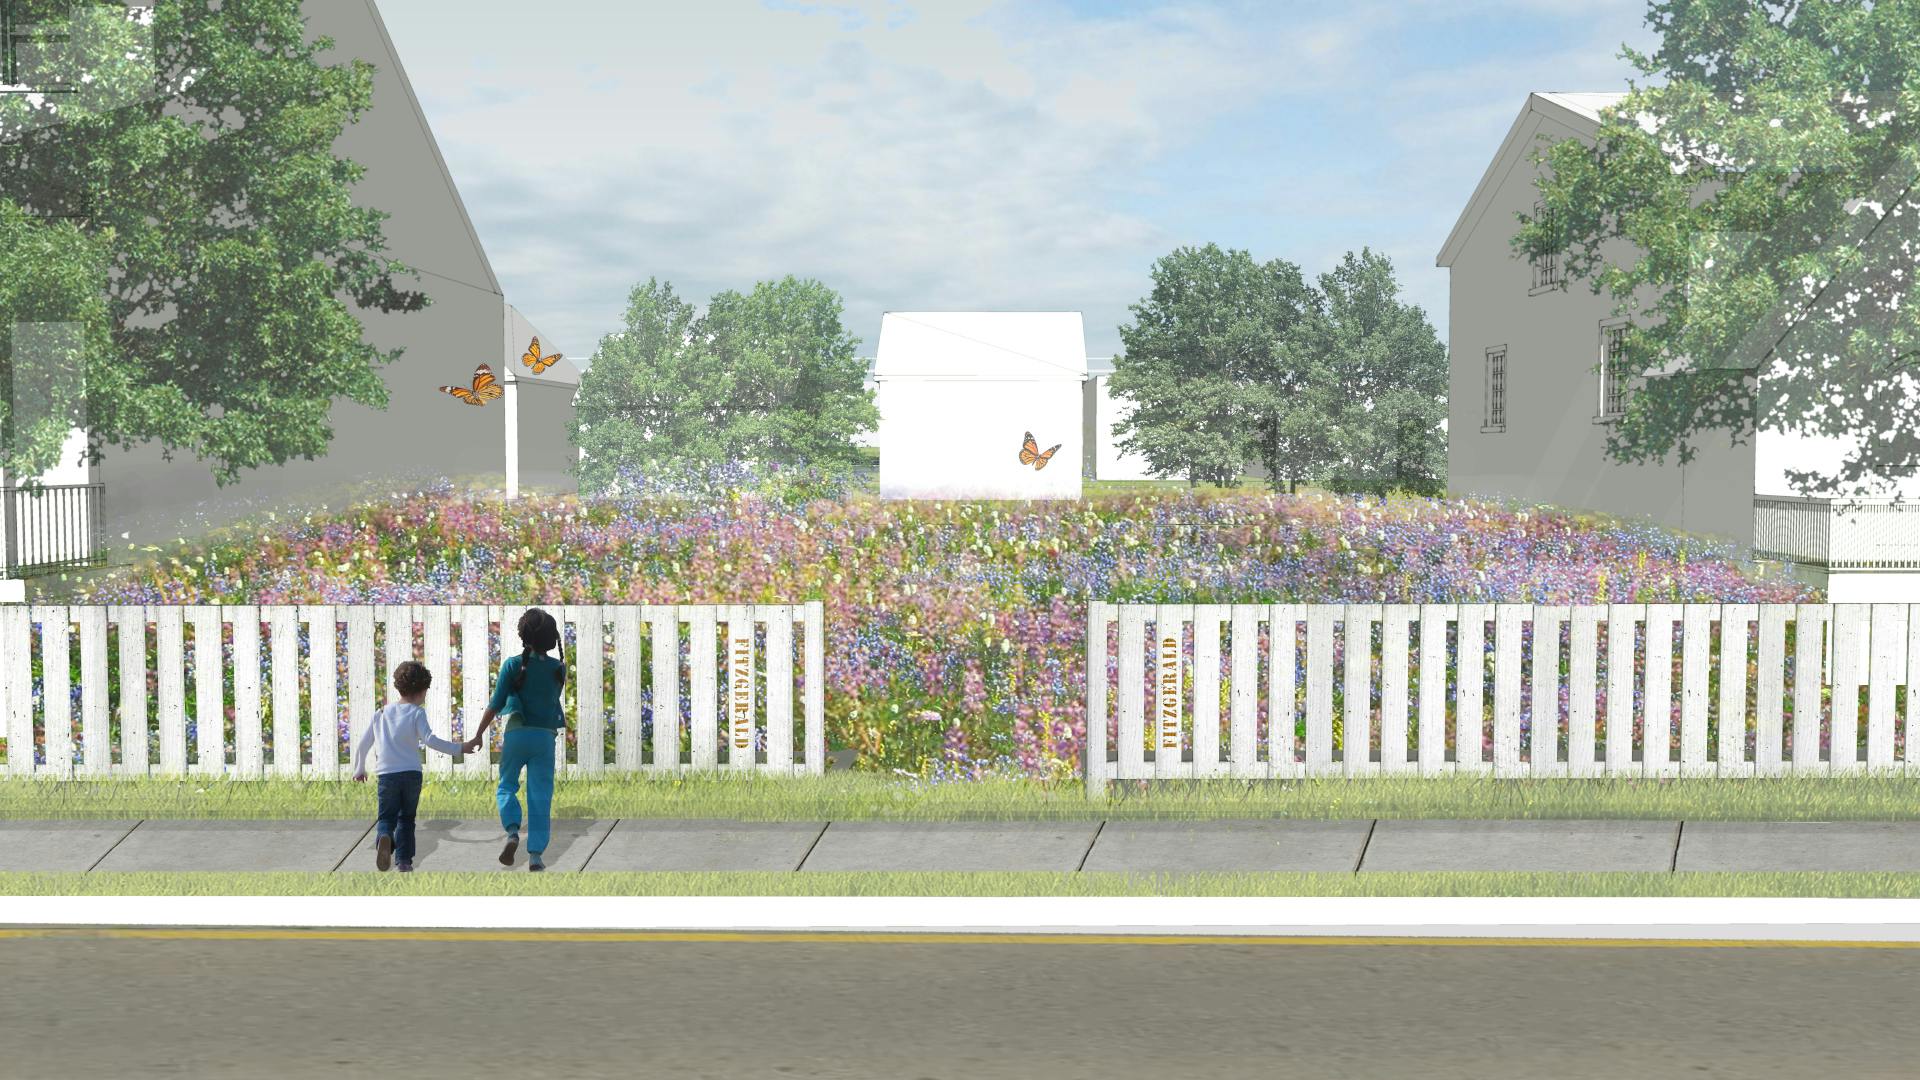 Perspective rendering of a vacant lot transformed into a pollinator meadow of wildflowers with pink, purple, and white flowers.